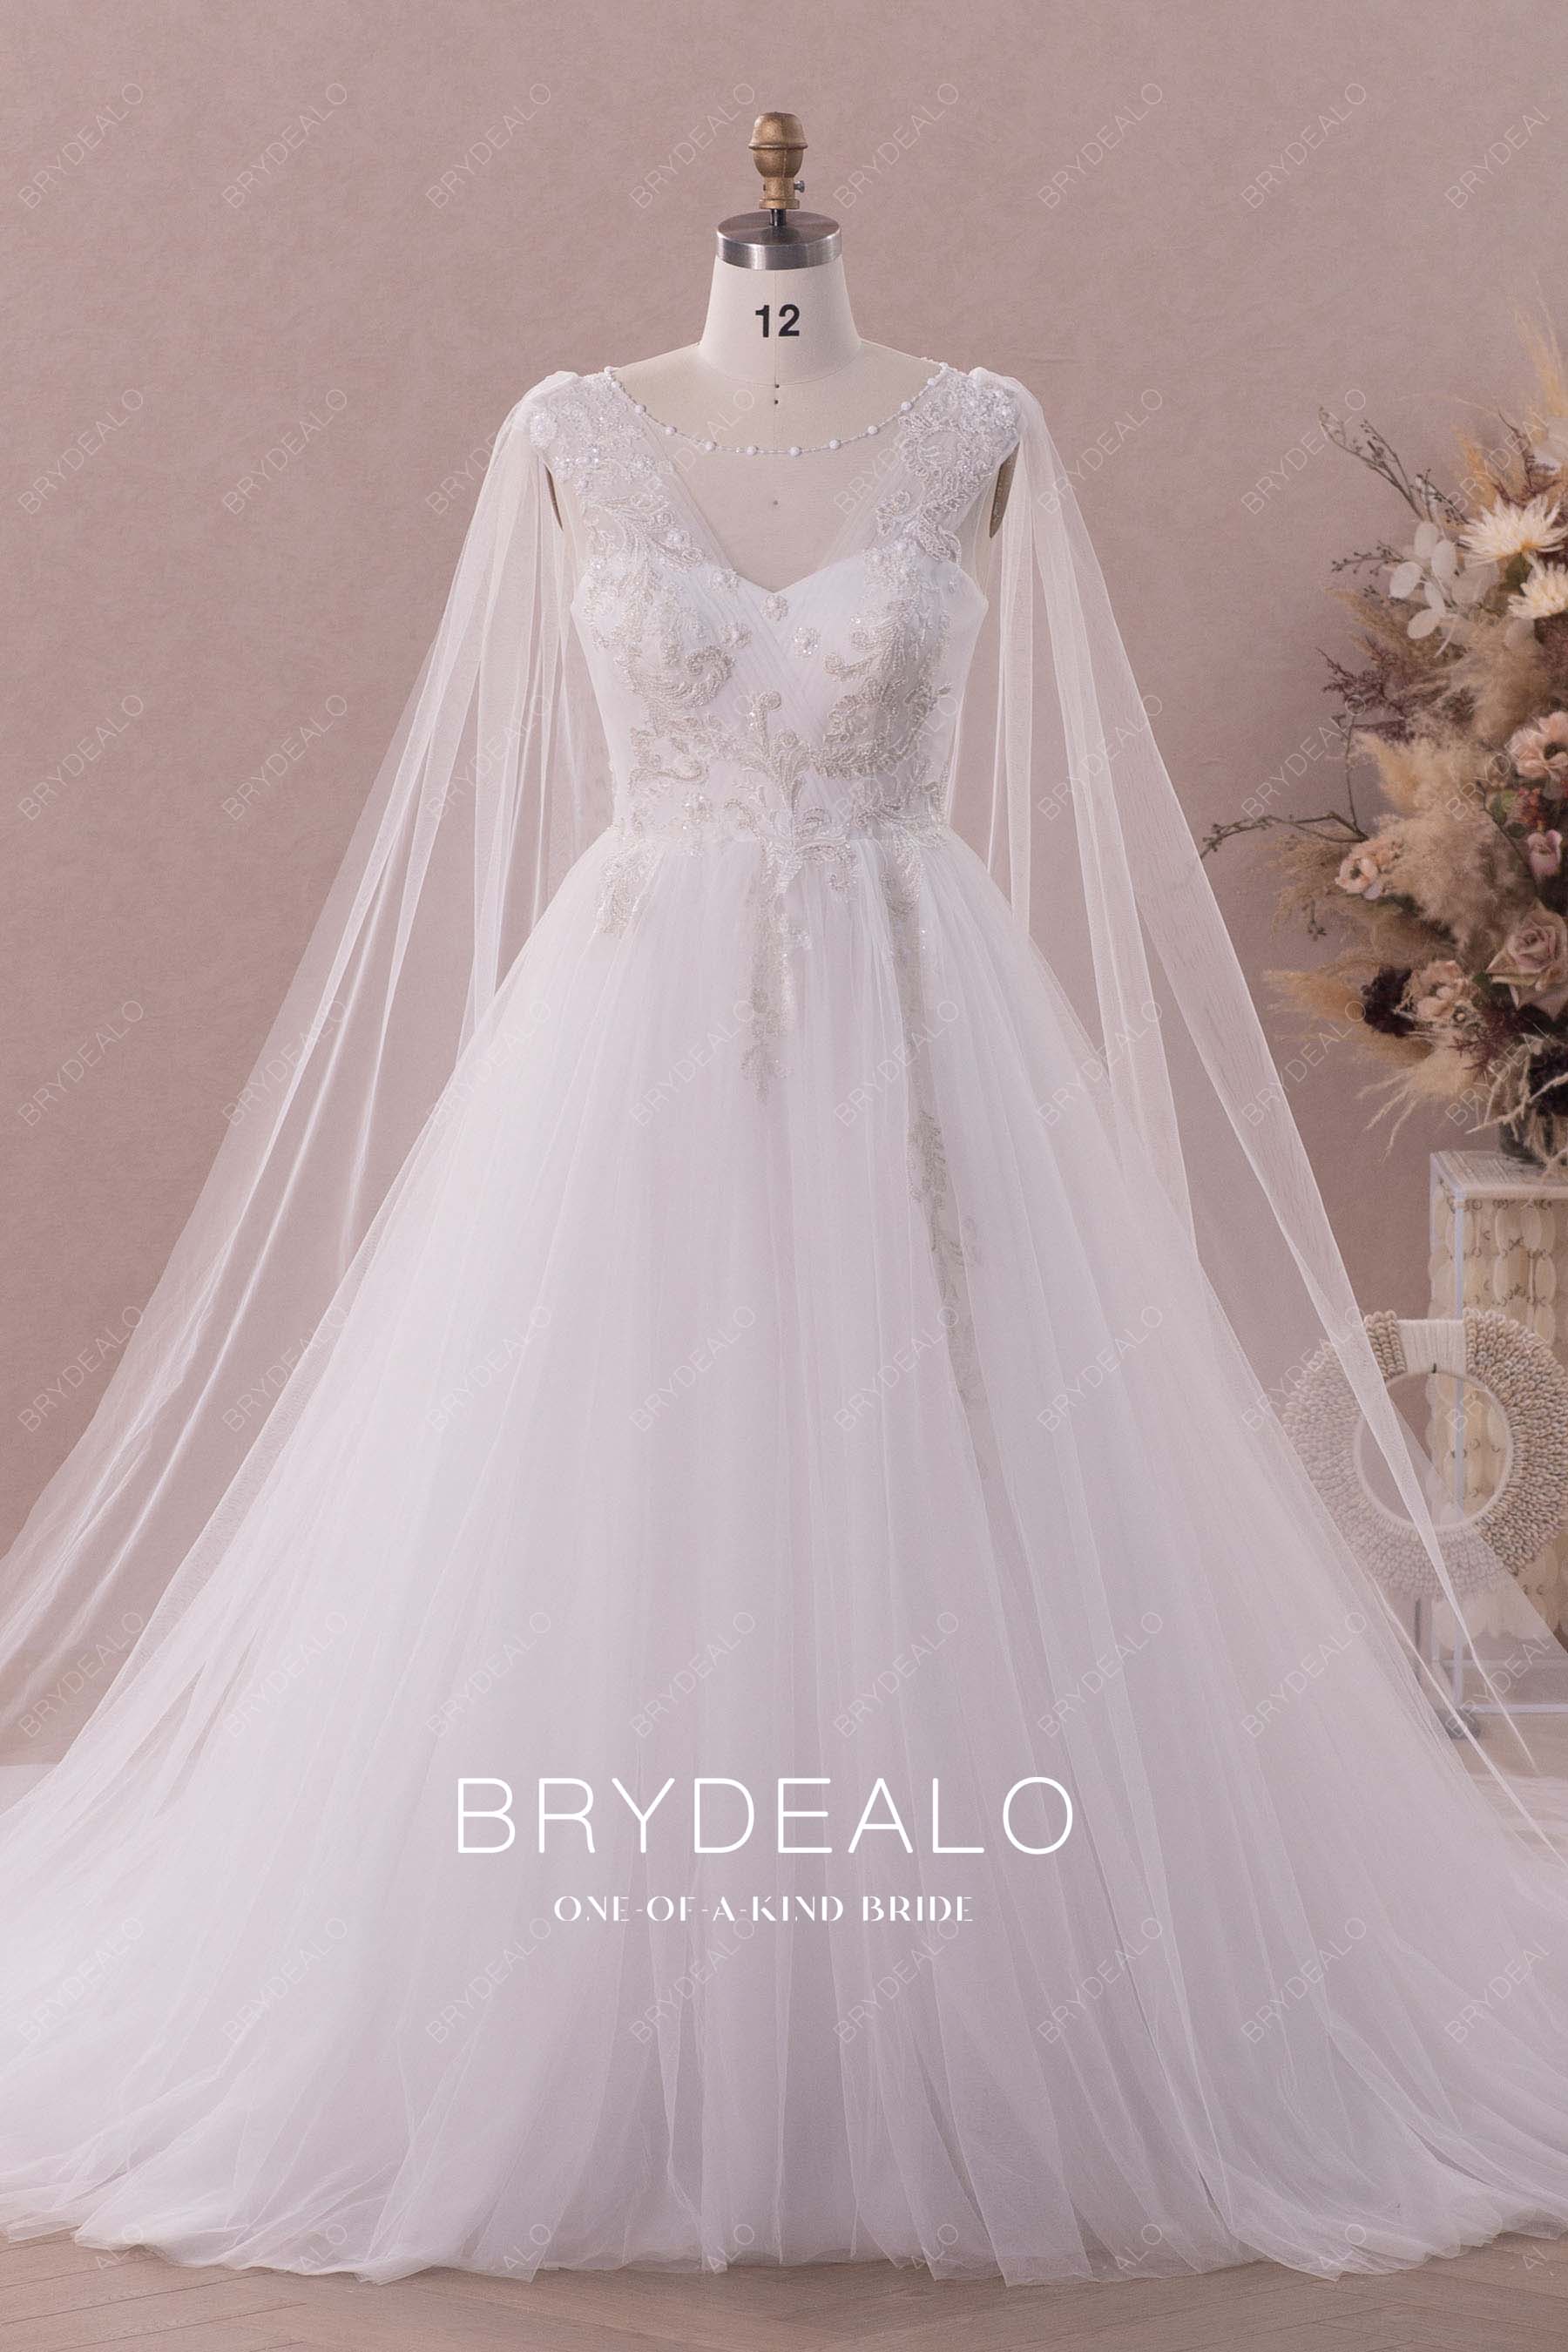 designed shoulder streamer illusion neck lace tulle wedding gown